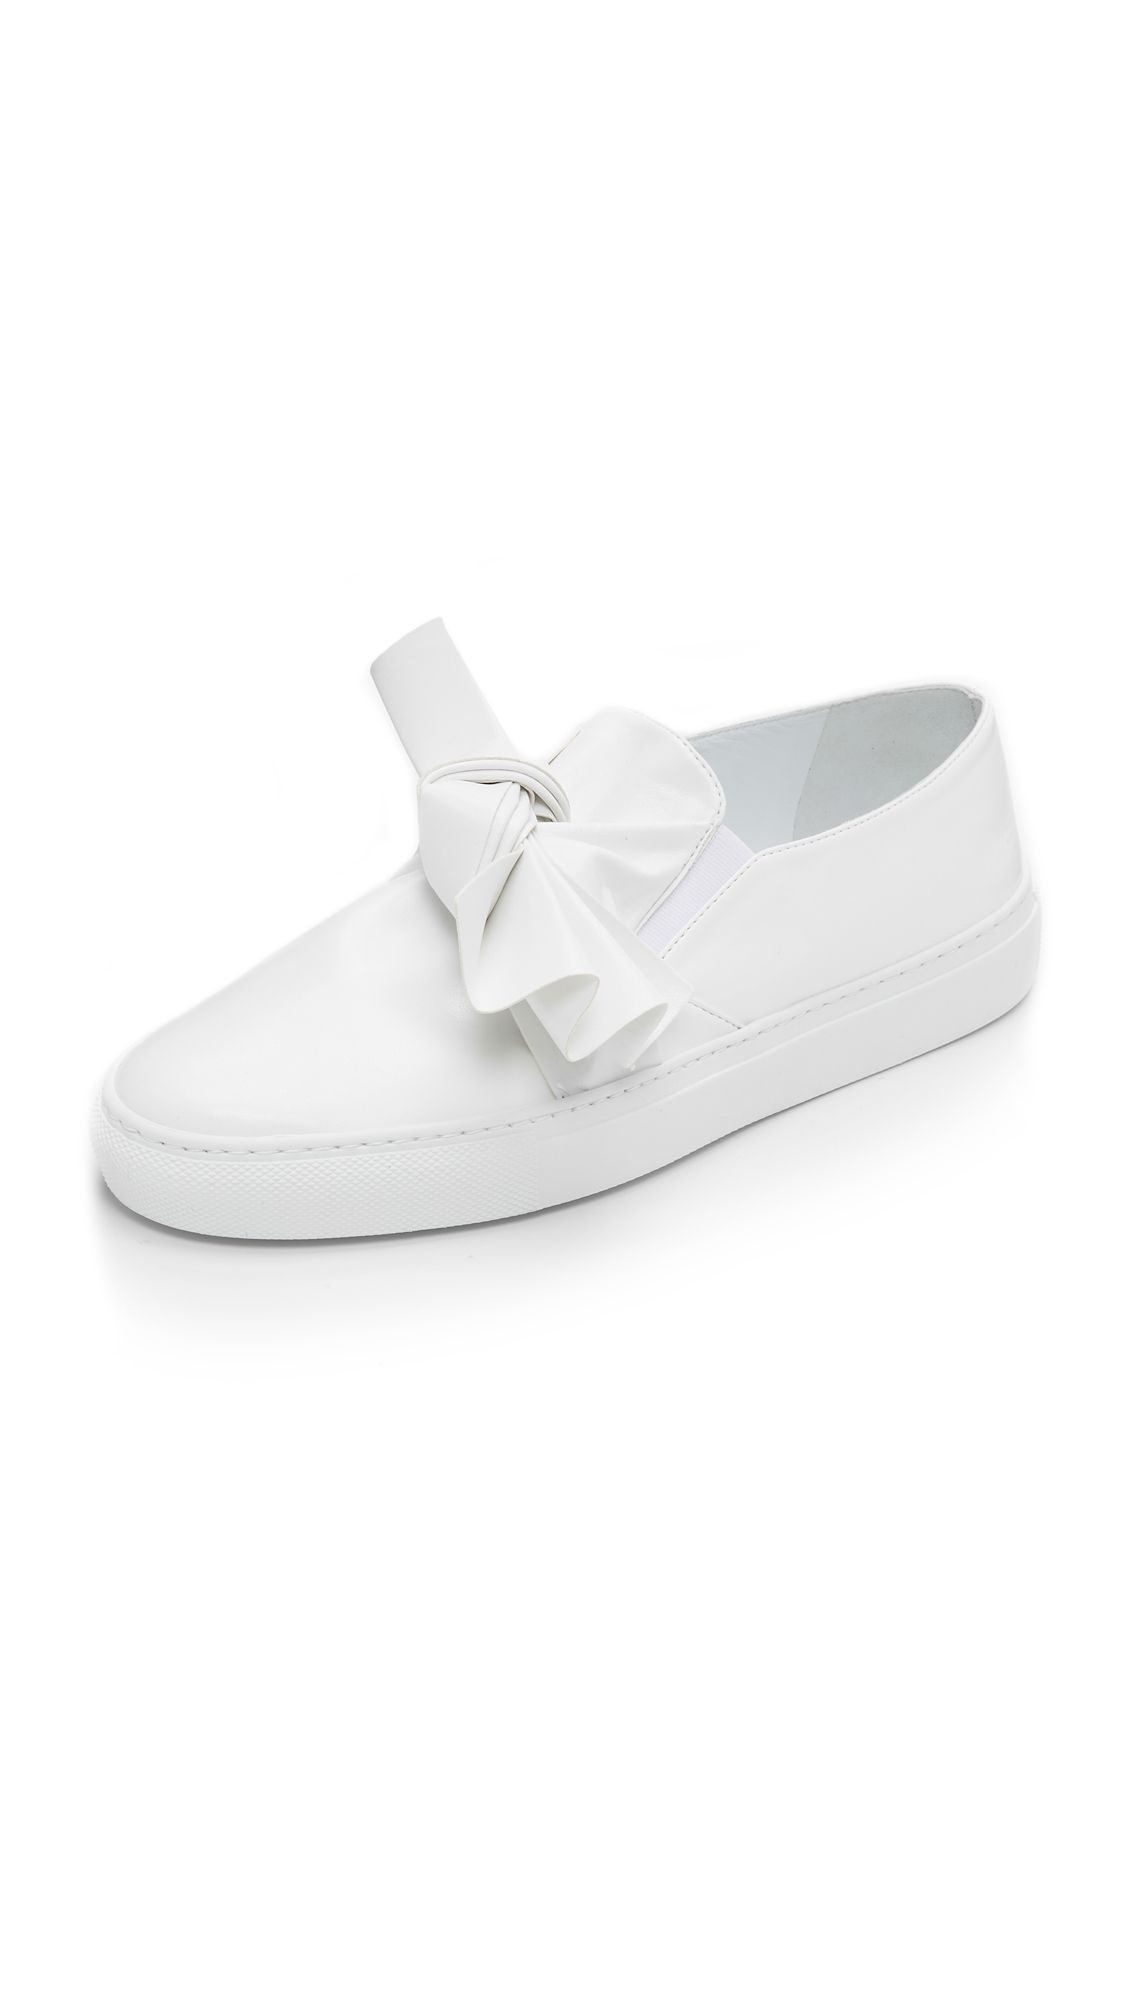 Cedric Charlier Faux Leather Sneakers - White | Shopbop